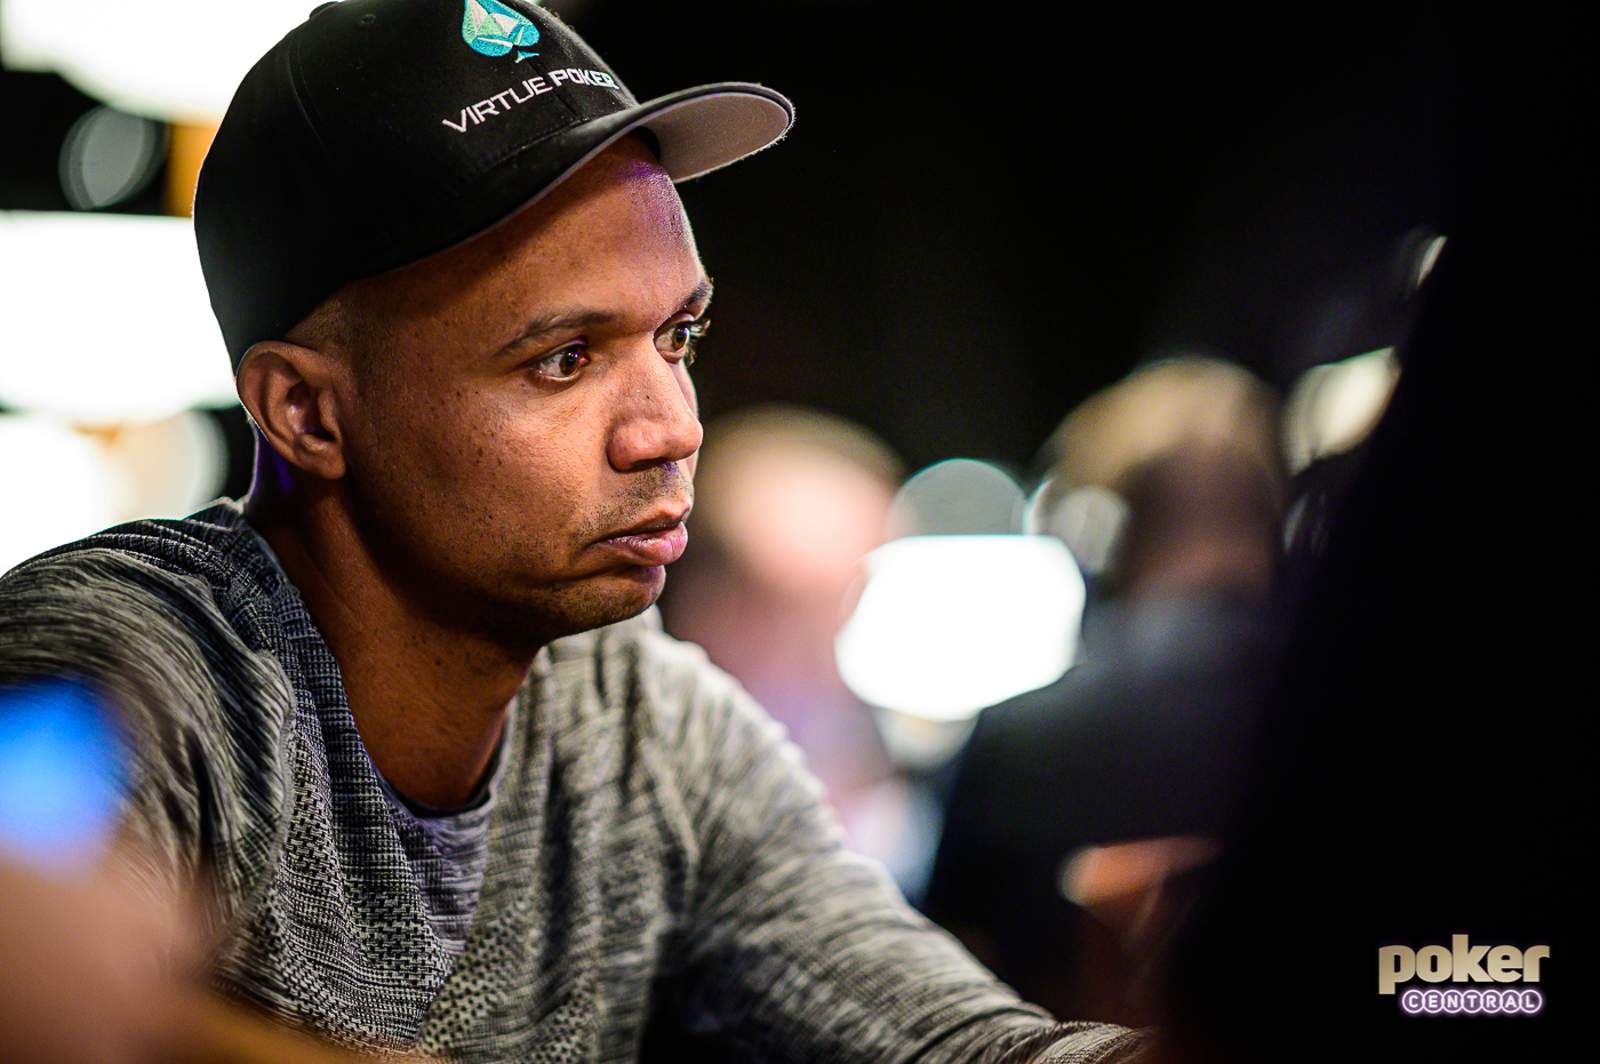 Phil Ivey Makes First Appearance at 2019 World Series of Poker